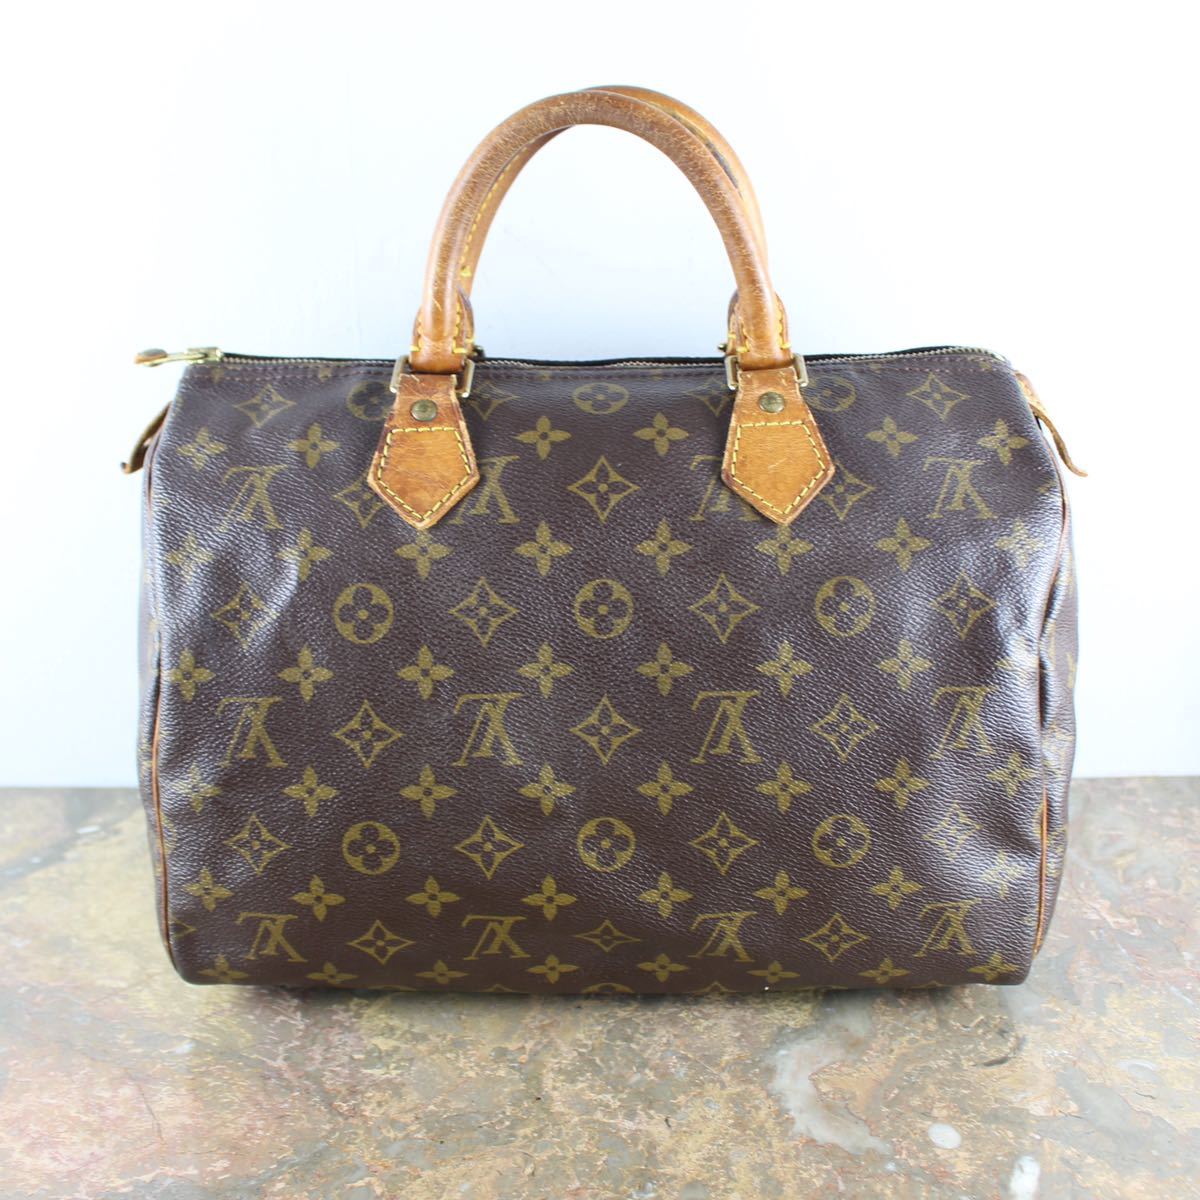 LOUIS VUITTON M41526 SD0994 SPEEDY30 MONOGRAM PATTERNED BOSTON BAG MADE IN USA/ルイヴィトンスピーディ30モノグラム柄ボストンバッグ